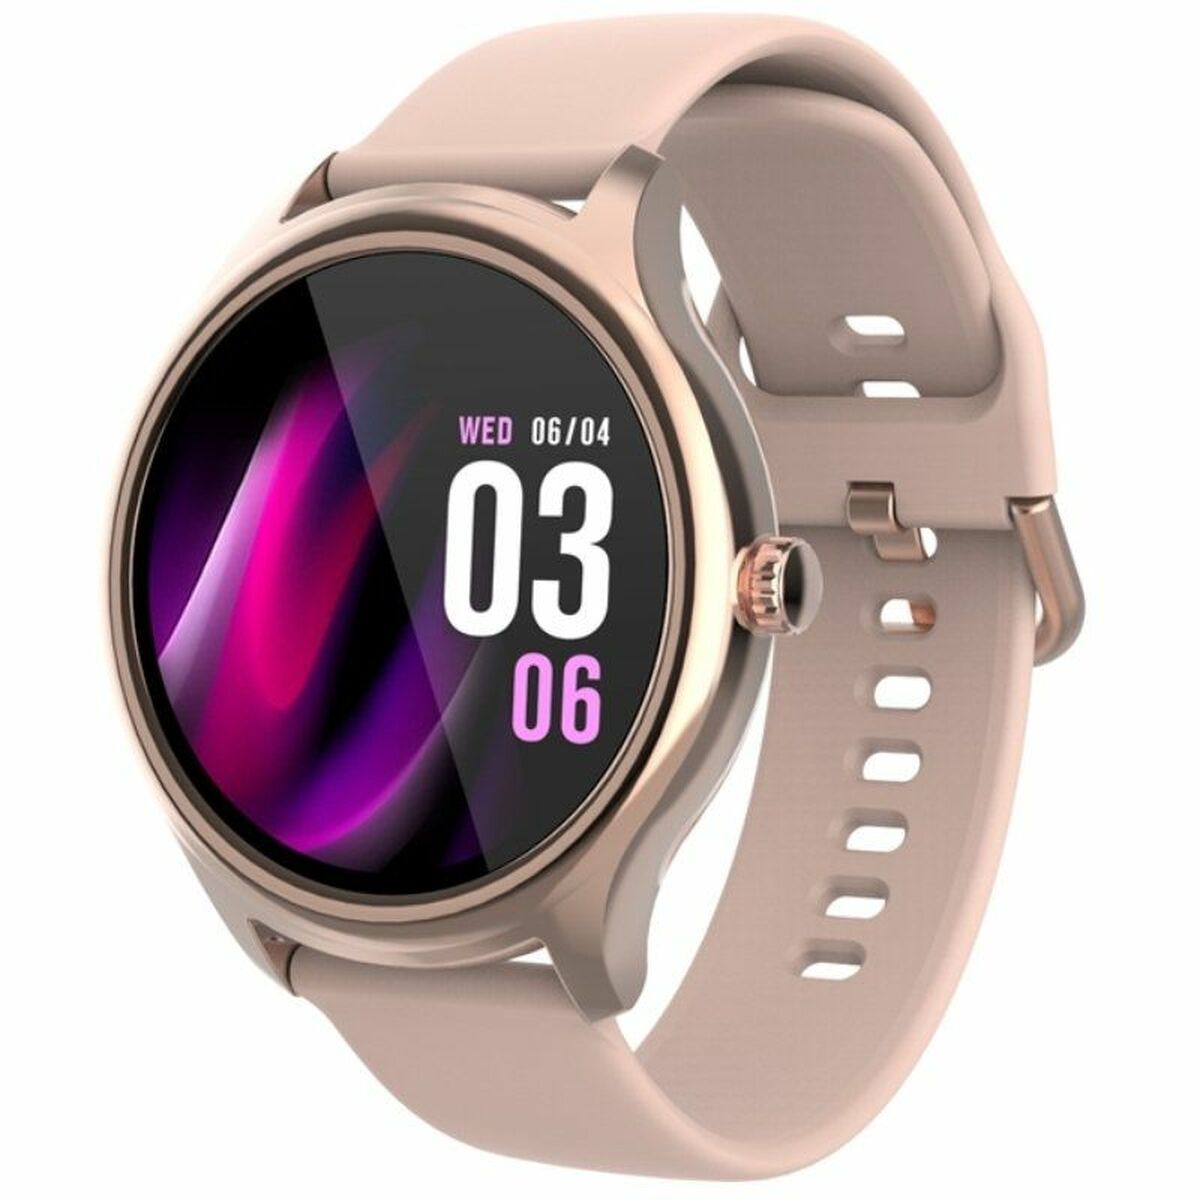 Smartwatch Forever ForeVive 3 SB-340 Rosa 1,32